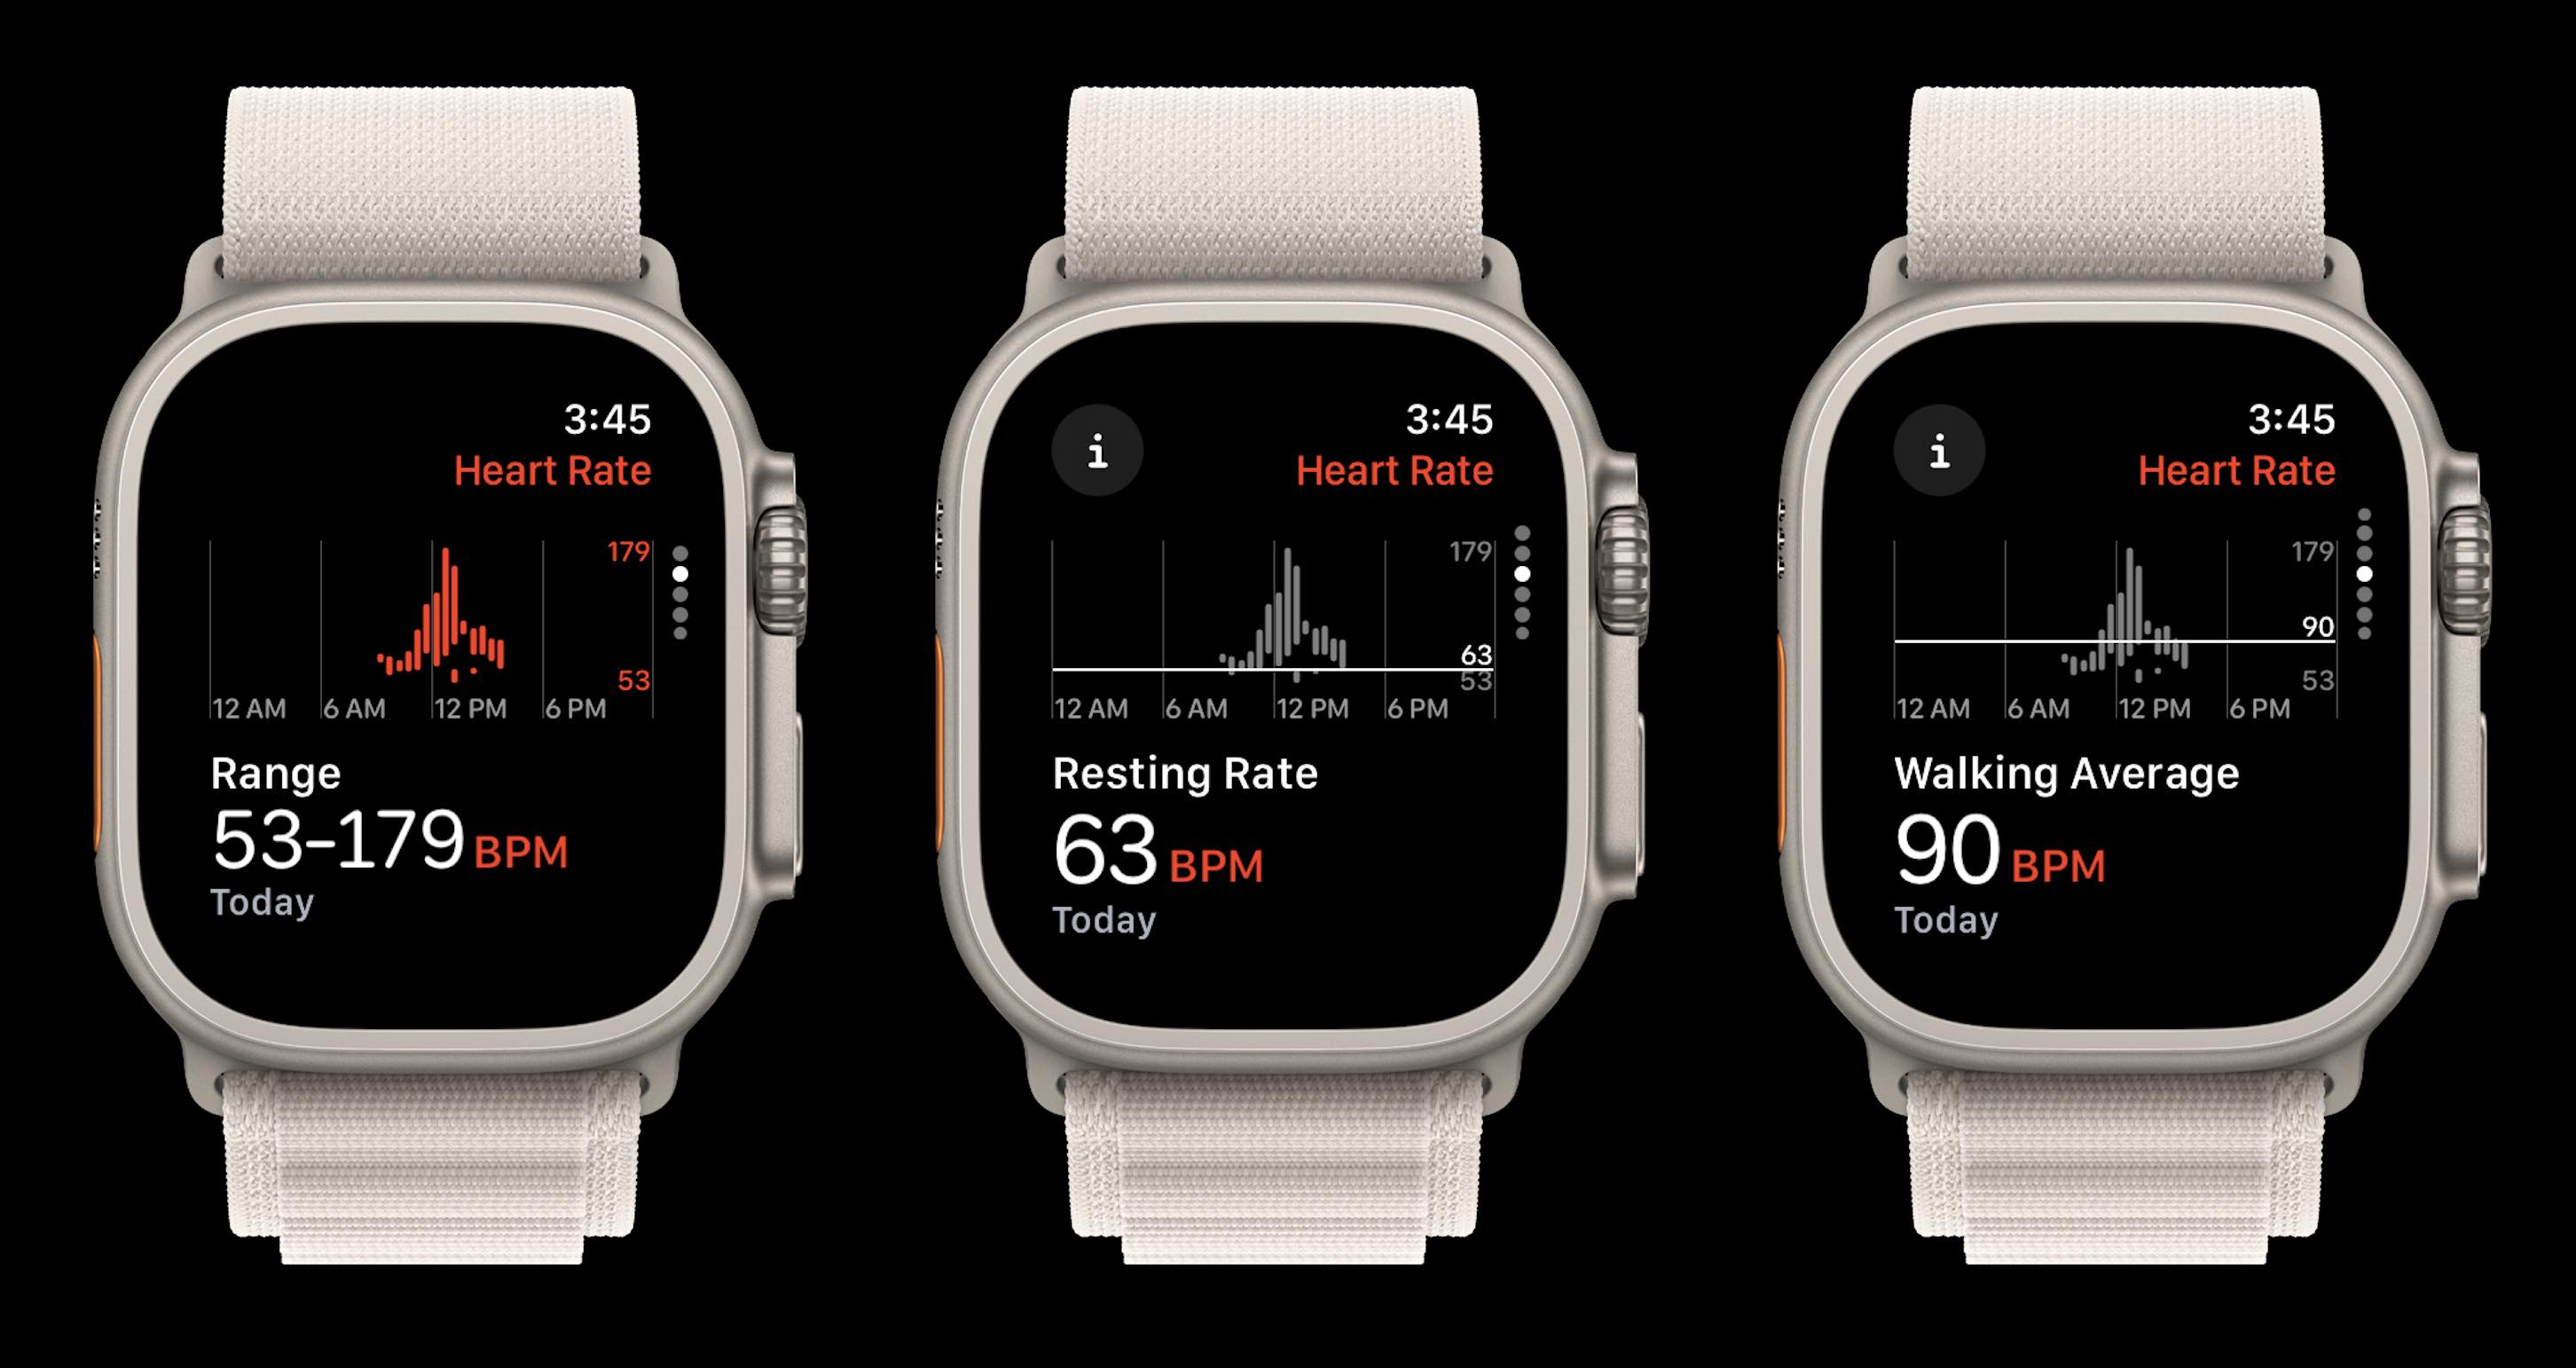 How to measure heart rate on your smartwatch - The Verge